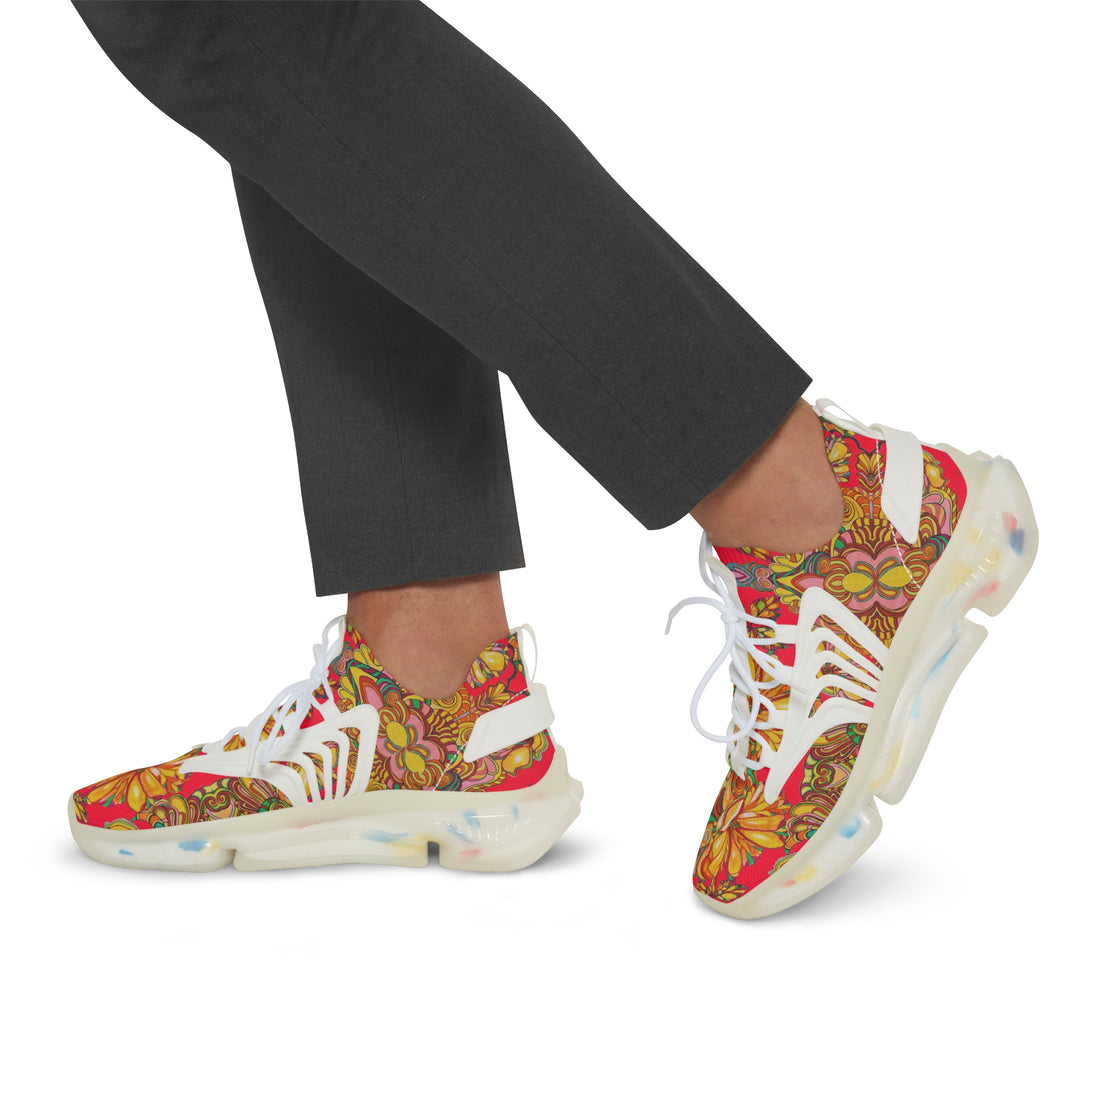 red floral print mesh knit sneakers